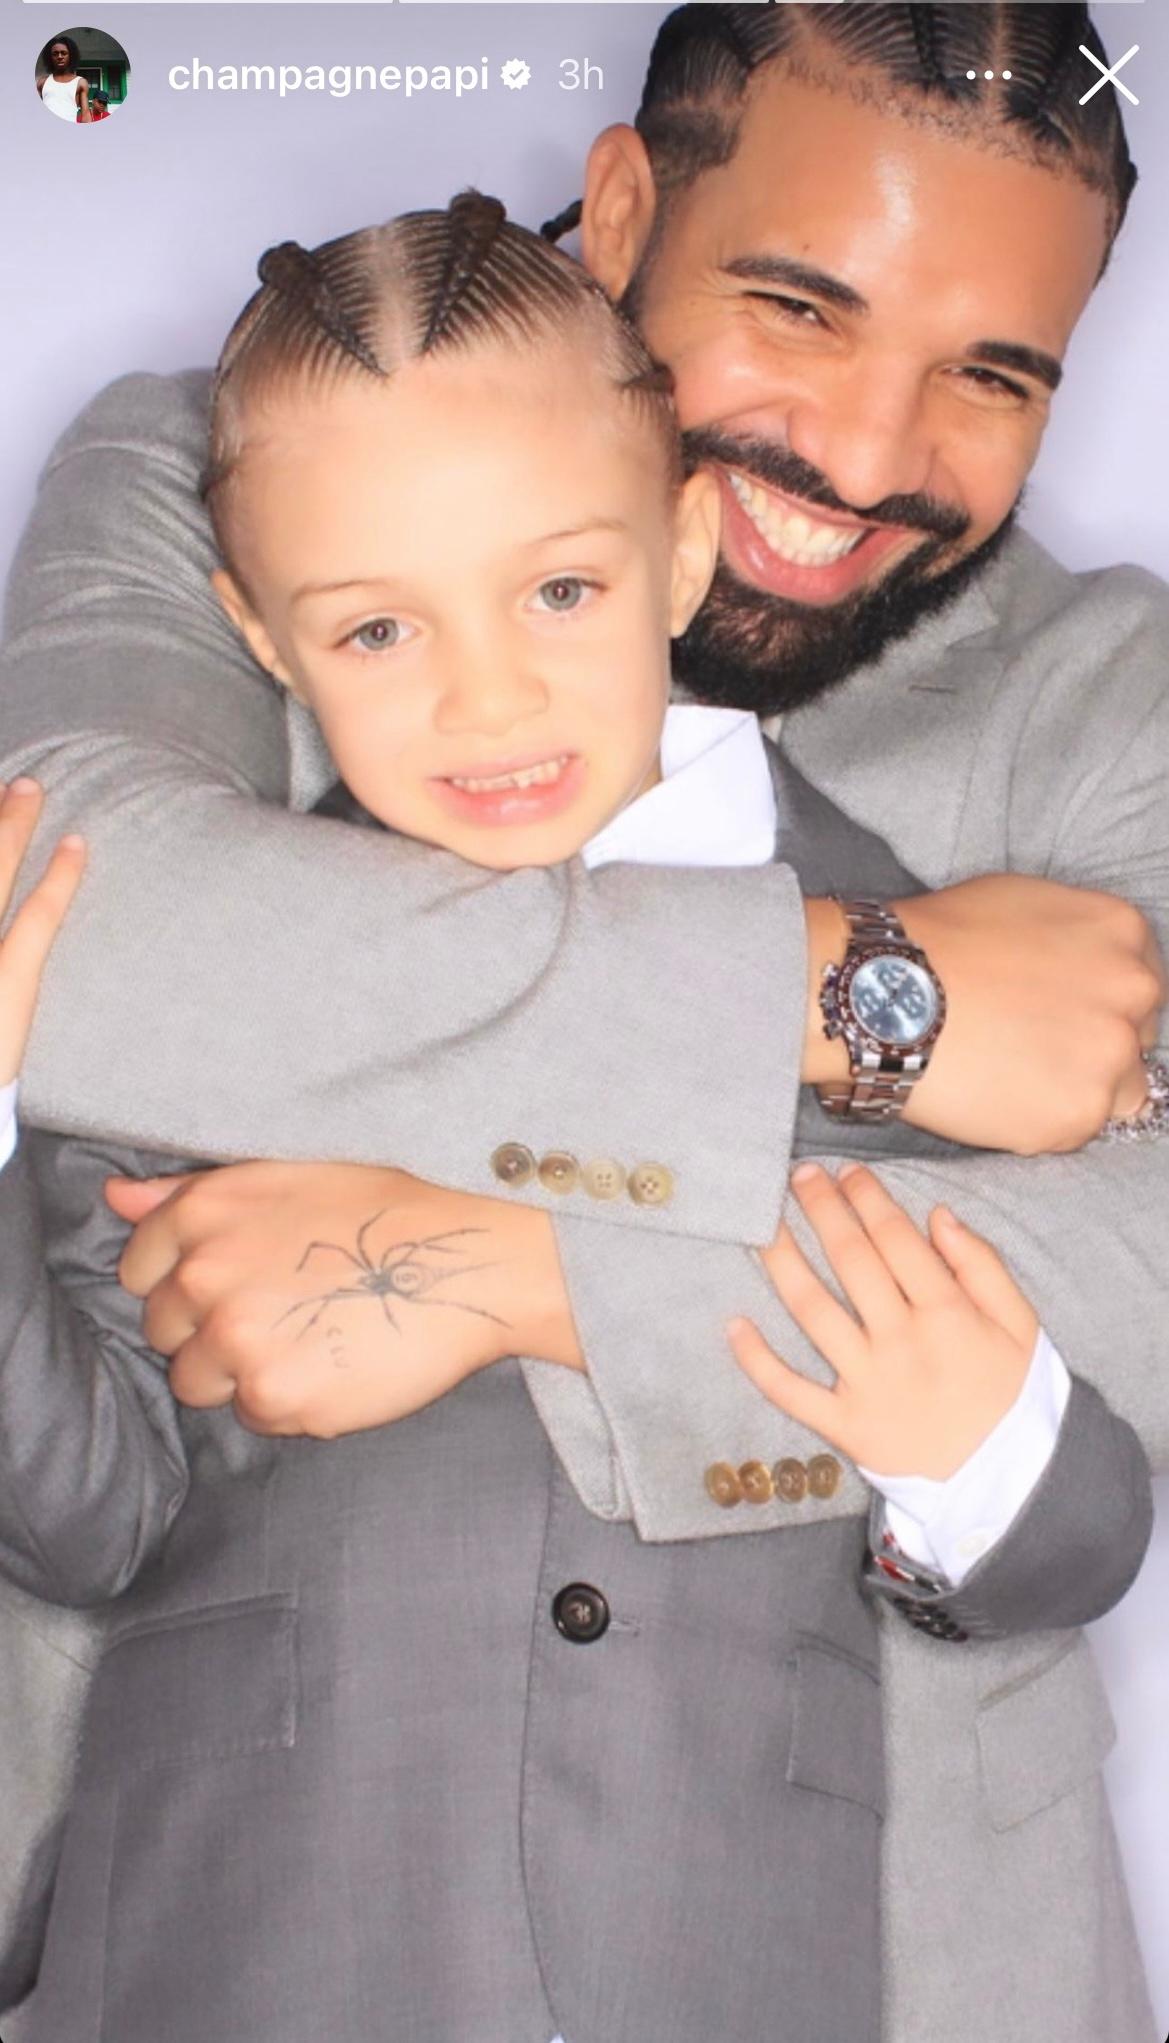 Drake and son Adonis in matching suits